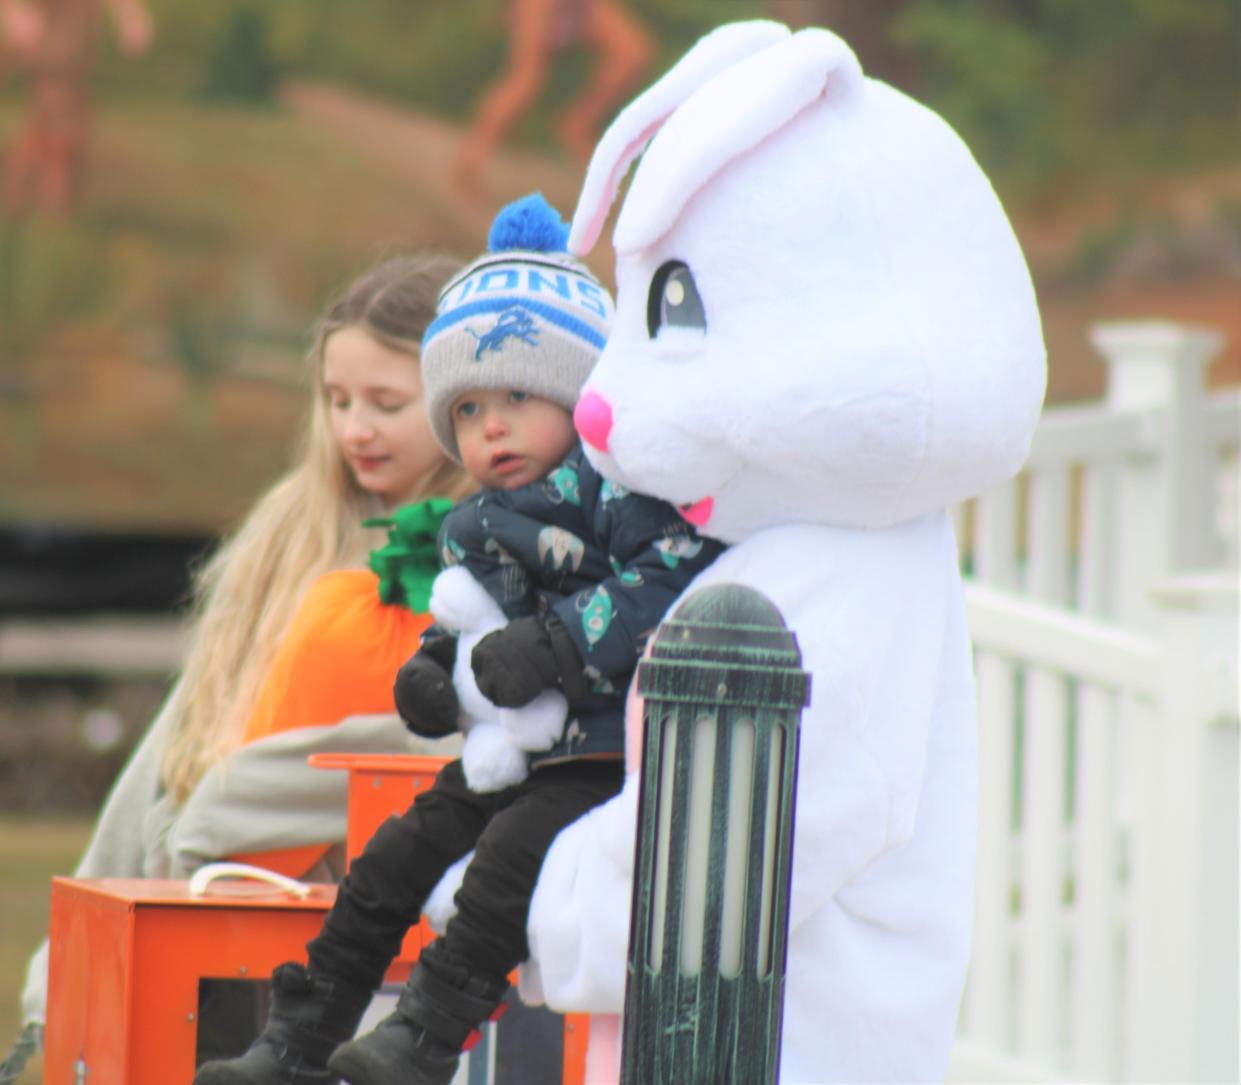 Youngsters were able to see the Easter Bunny during the 2023 Cheboygan Downtown Easter Egg Hunt festivities at Washington Park.